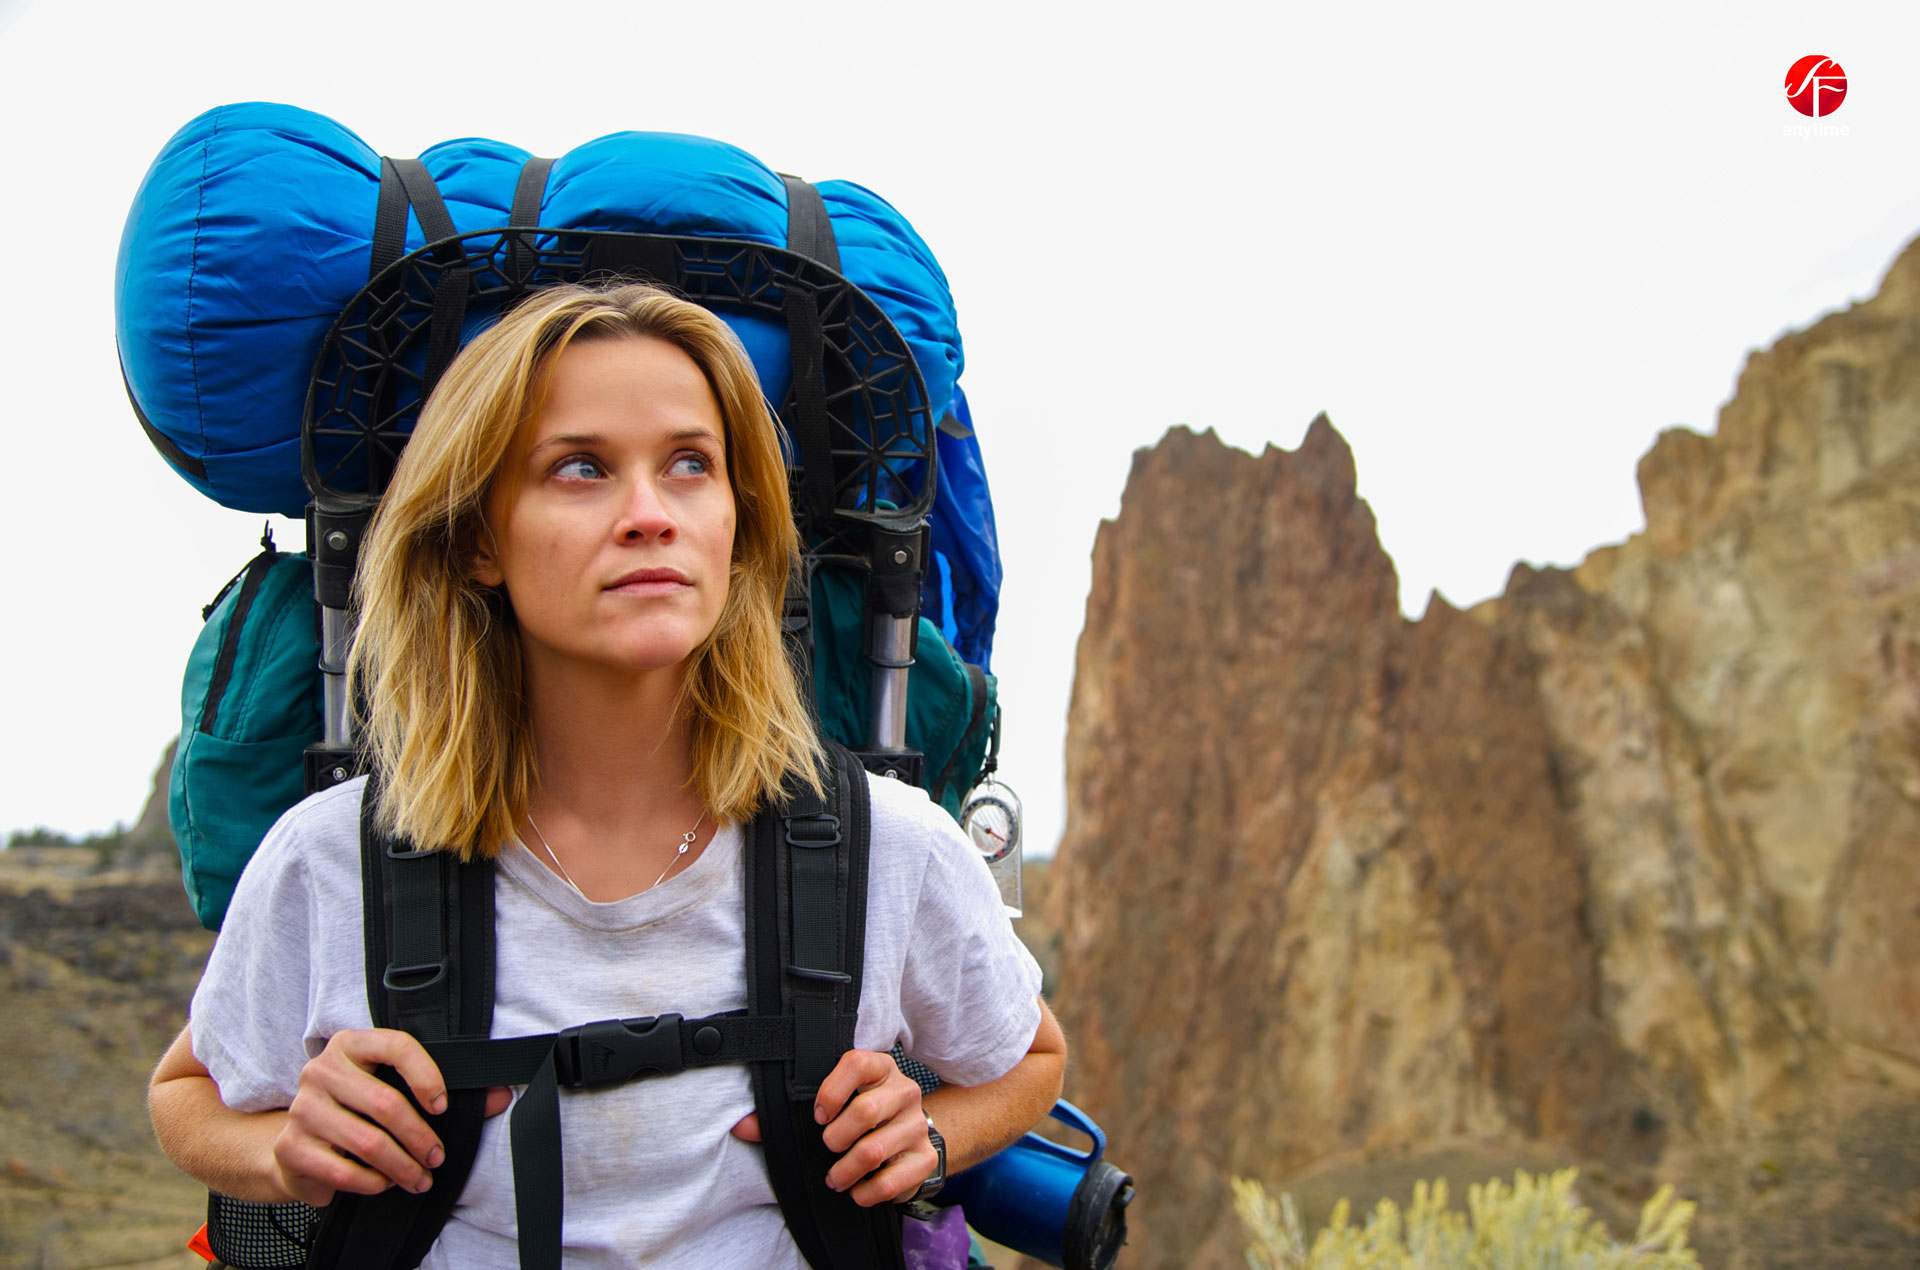 Wild-Reese-Witherspoon